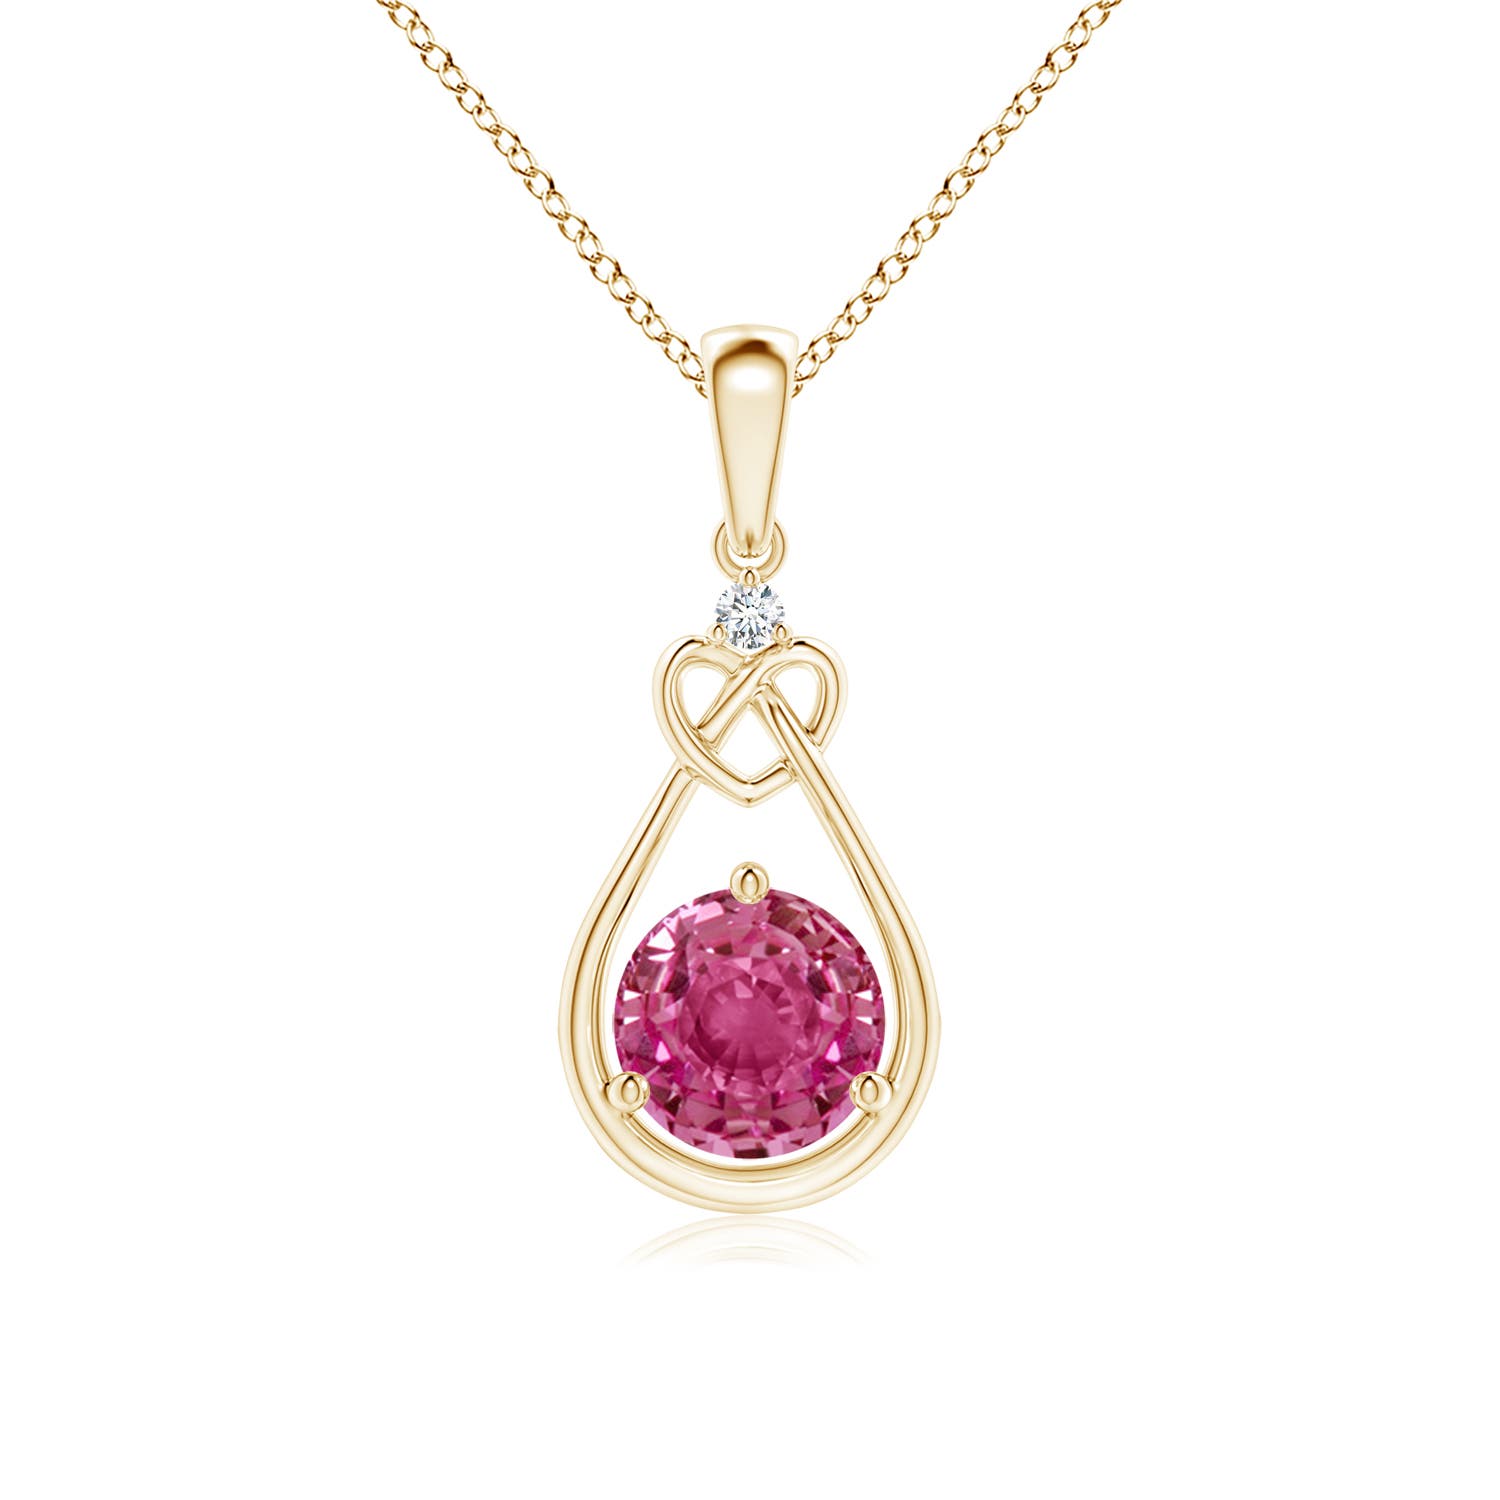 AAAA - Pink Sapphire / 1.01 CT / 14 KT Yellow Gold